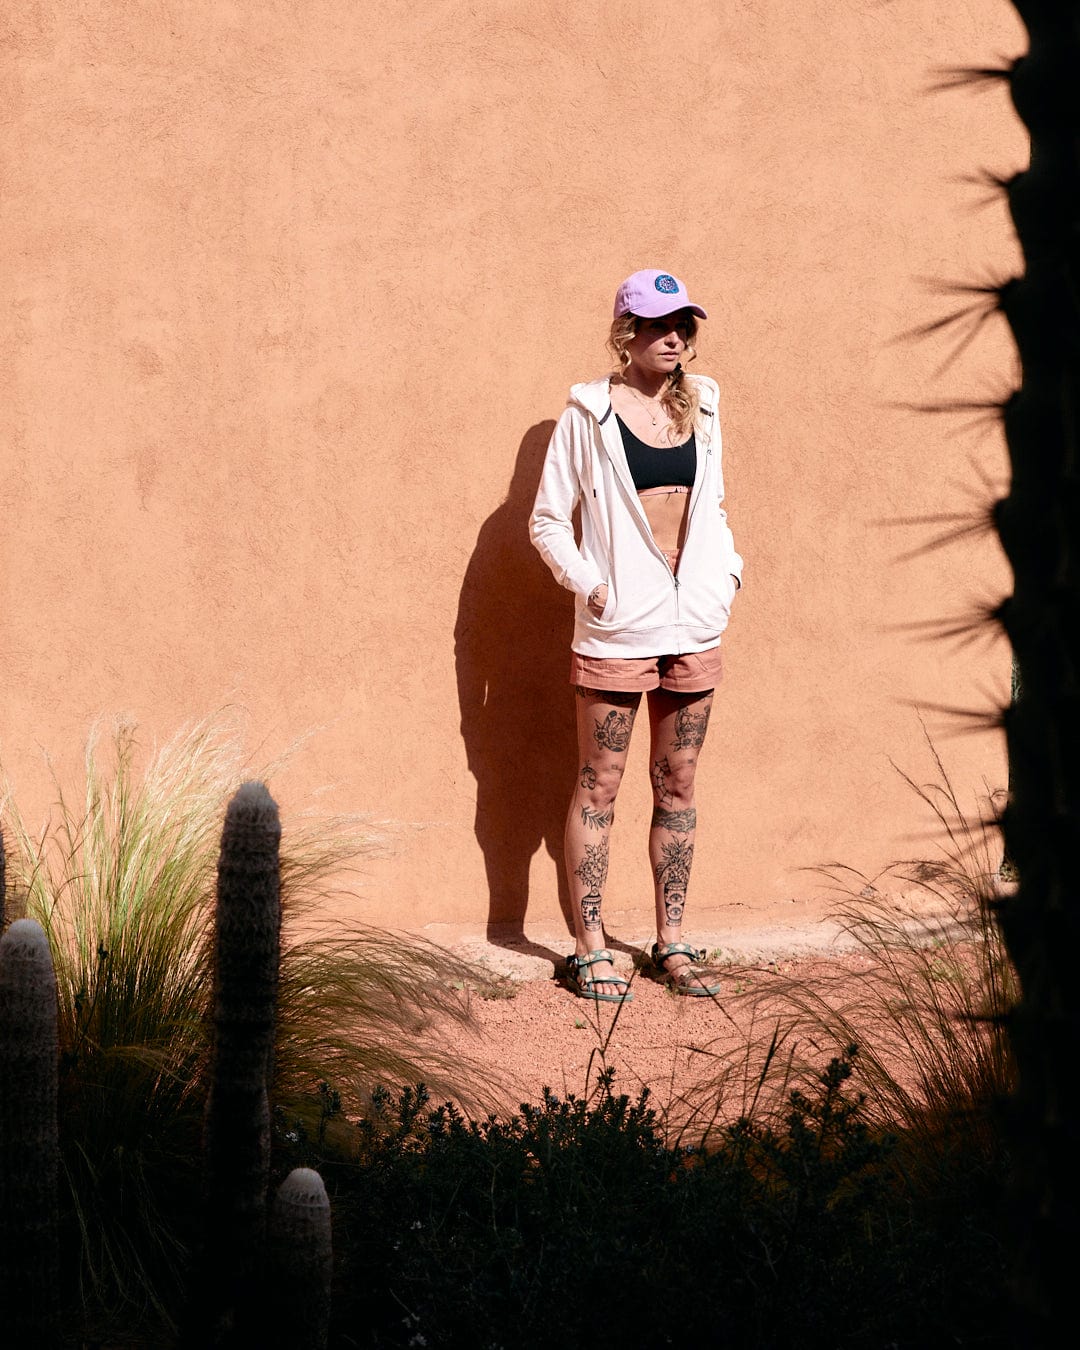 Woman in a white jacket and cap, featuring Saltrock branding, standing beside cacti against a peach-colored wall, sunglasses perched atop her head wearing the Ginny - Womens Zip Hoodie - Cream by Saltrock.